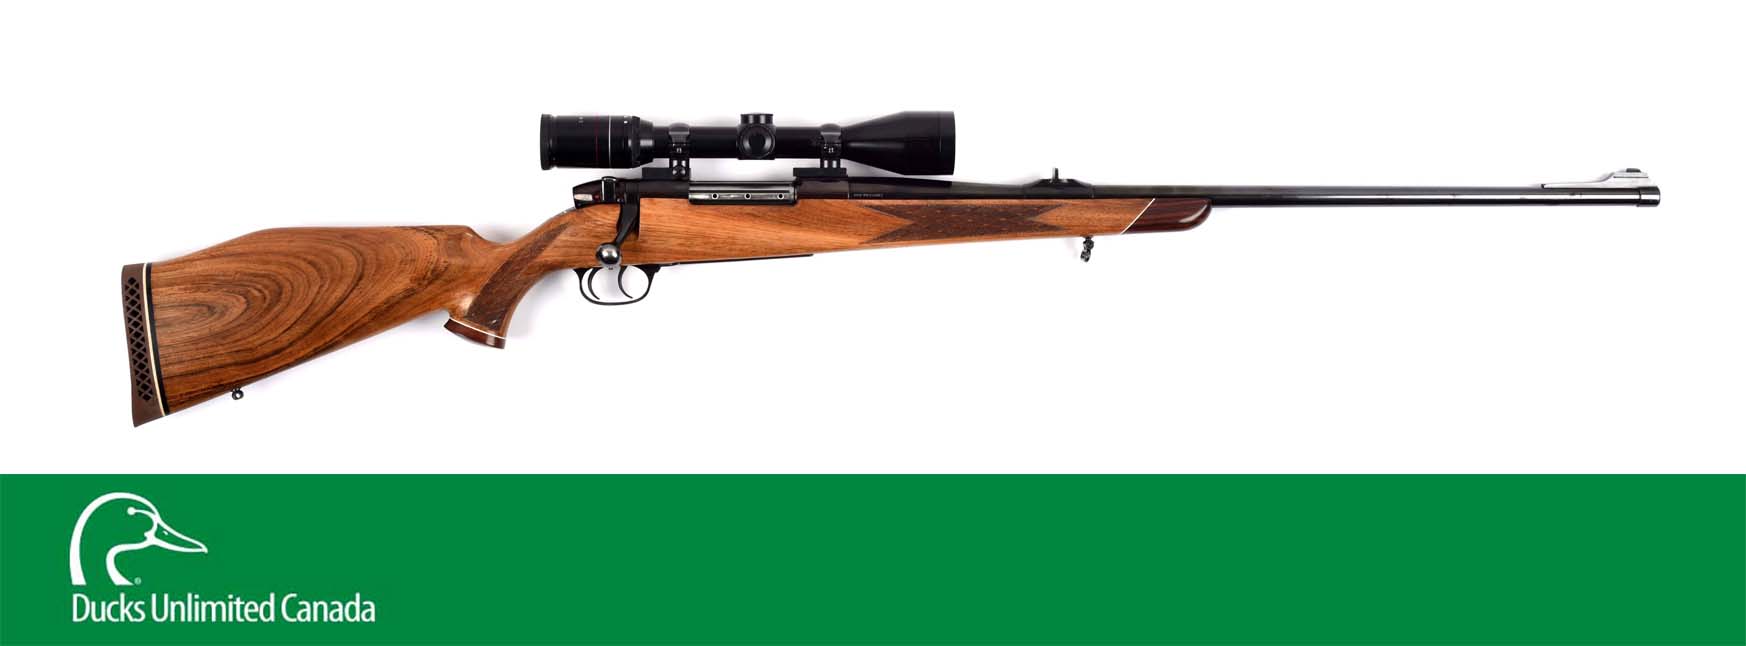 (M^) Rare German Made Weatherby Sauer Europa Bolt Action Sporing Rifle with Double Set Triggers.